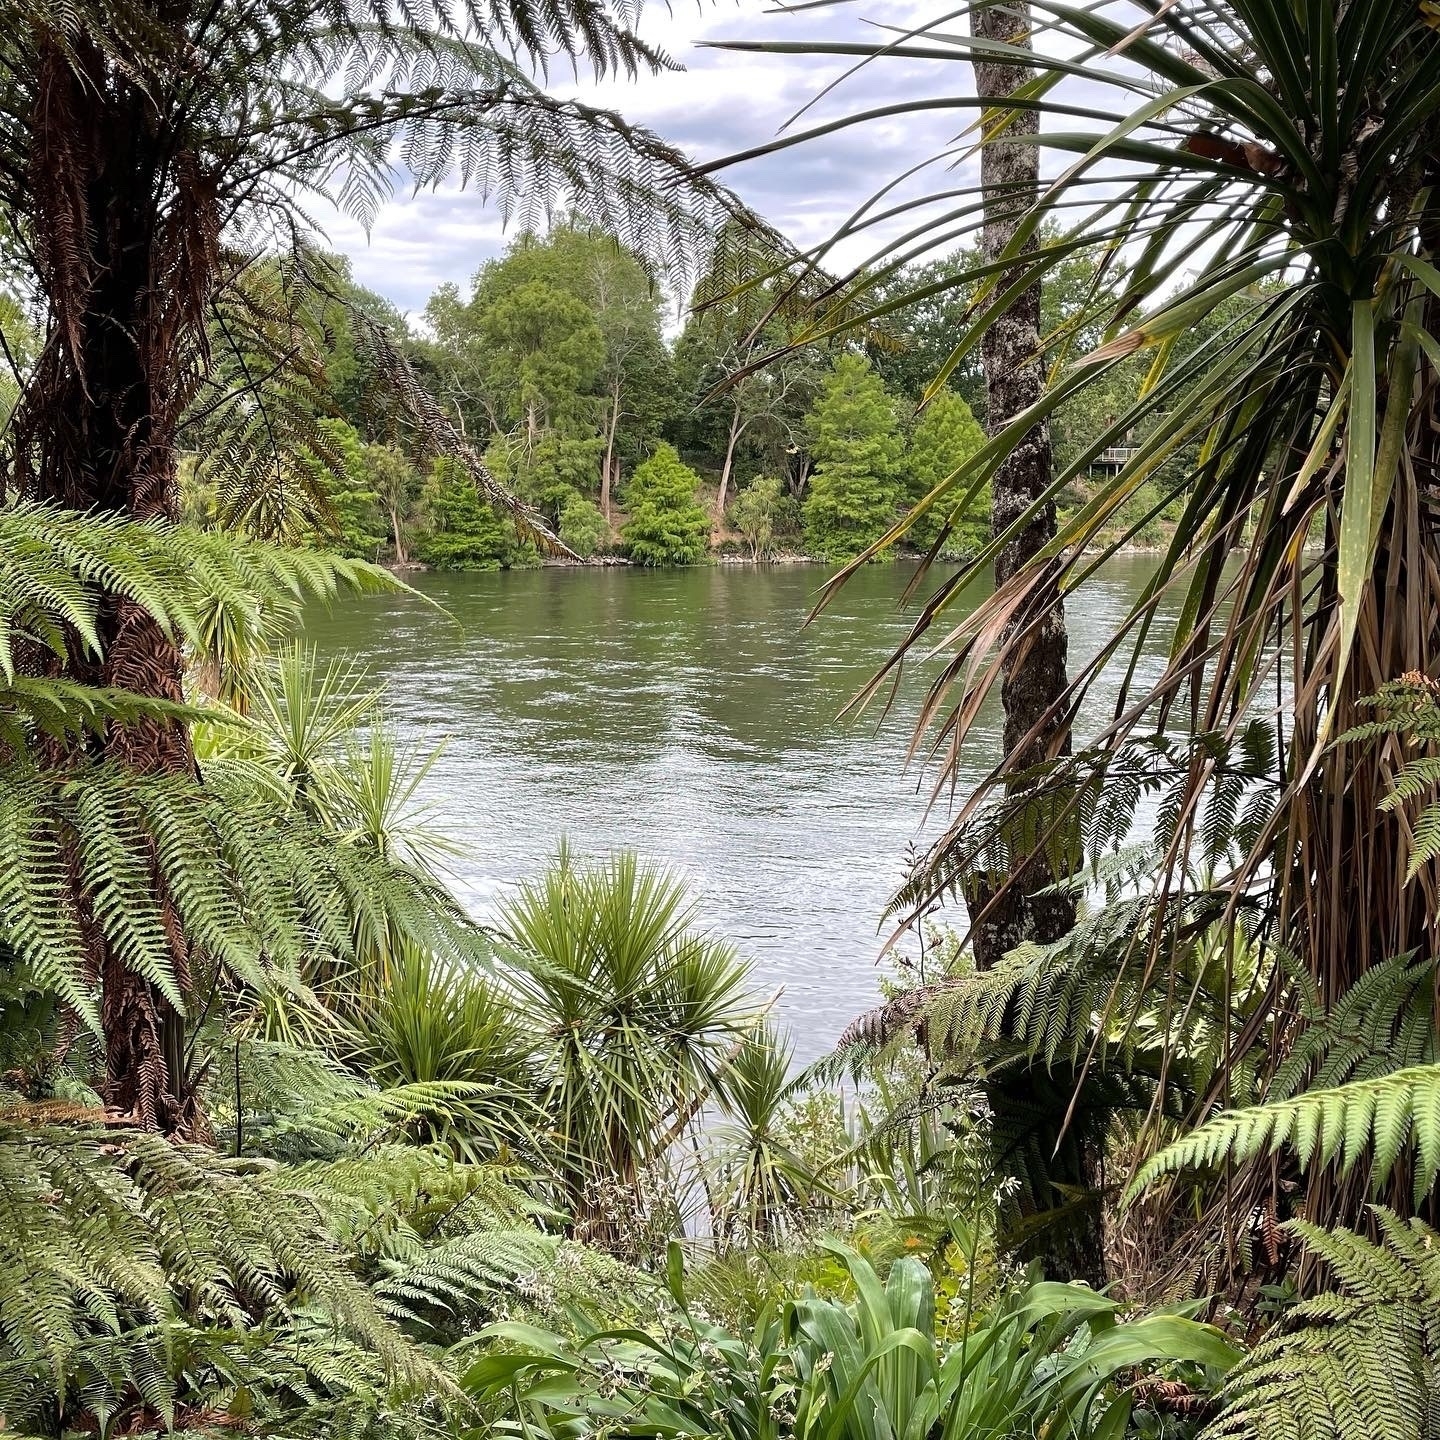 View of a full and wide river through lush subtropical foliage